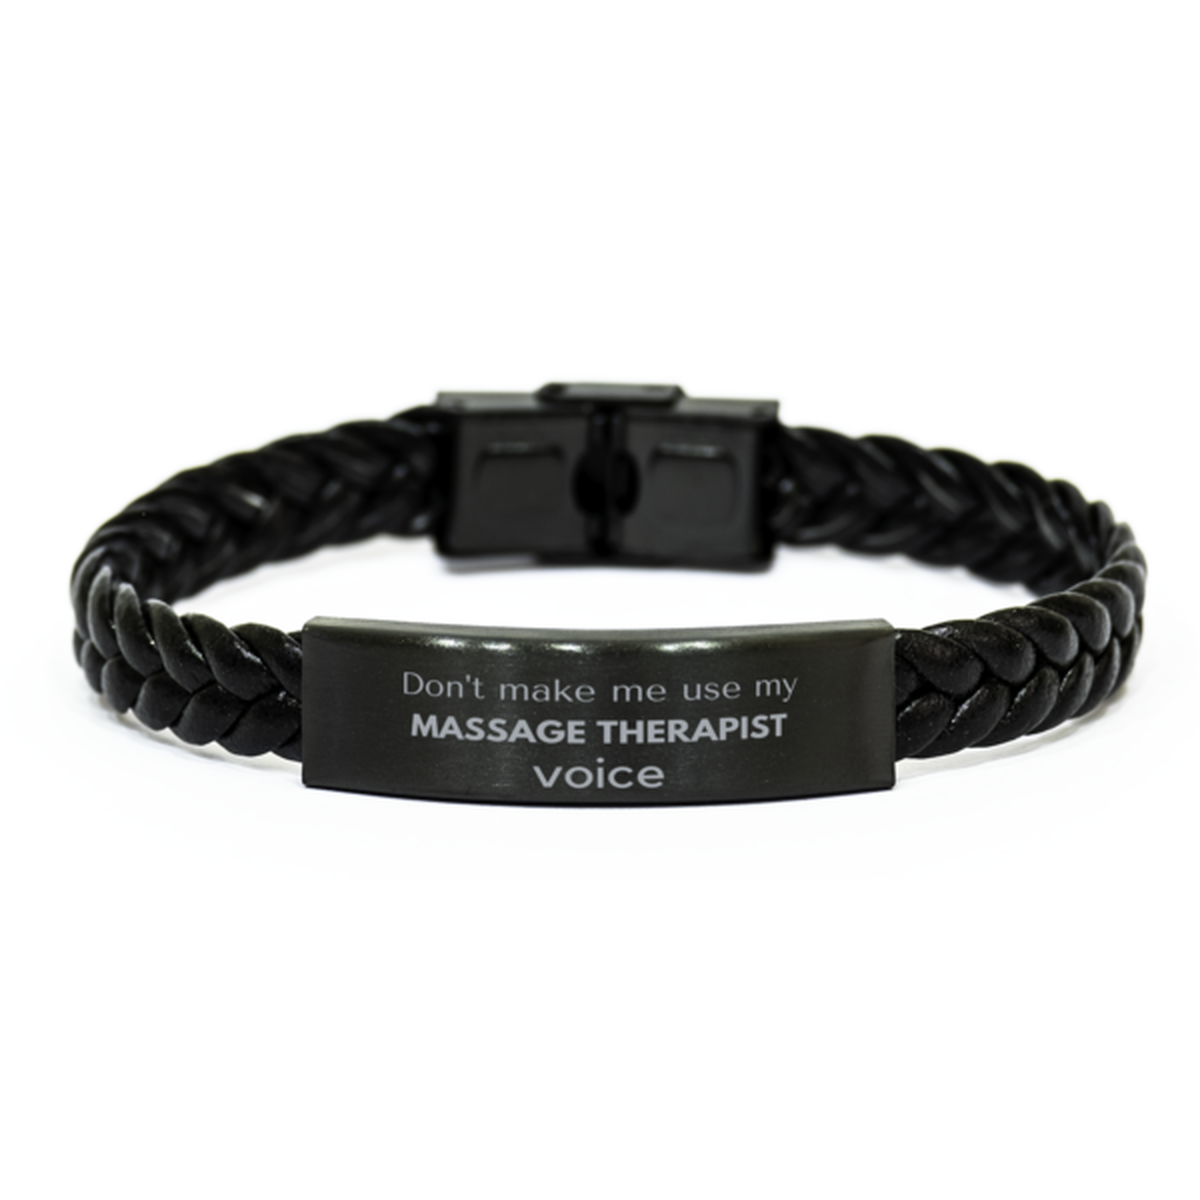 Don't make me use my Massage Therapist voice, Sarcasm Massage Therapist Gifts, Christmas Massage Therapist Braided Leather Bracelet Birthday Unique Gifts For Massage Therapist Coworkers, Men, Women, Colleague, Friends